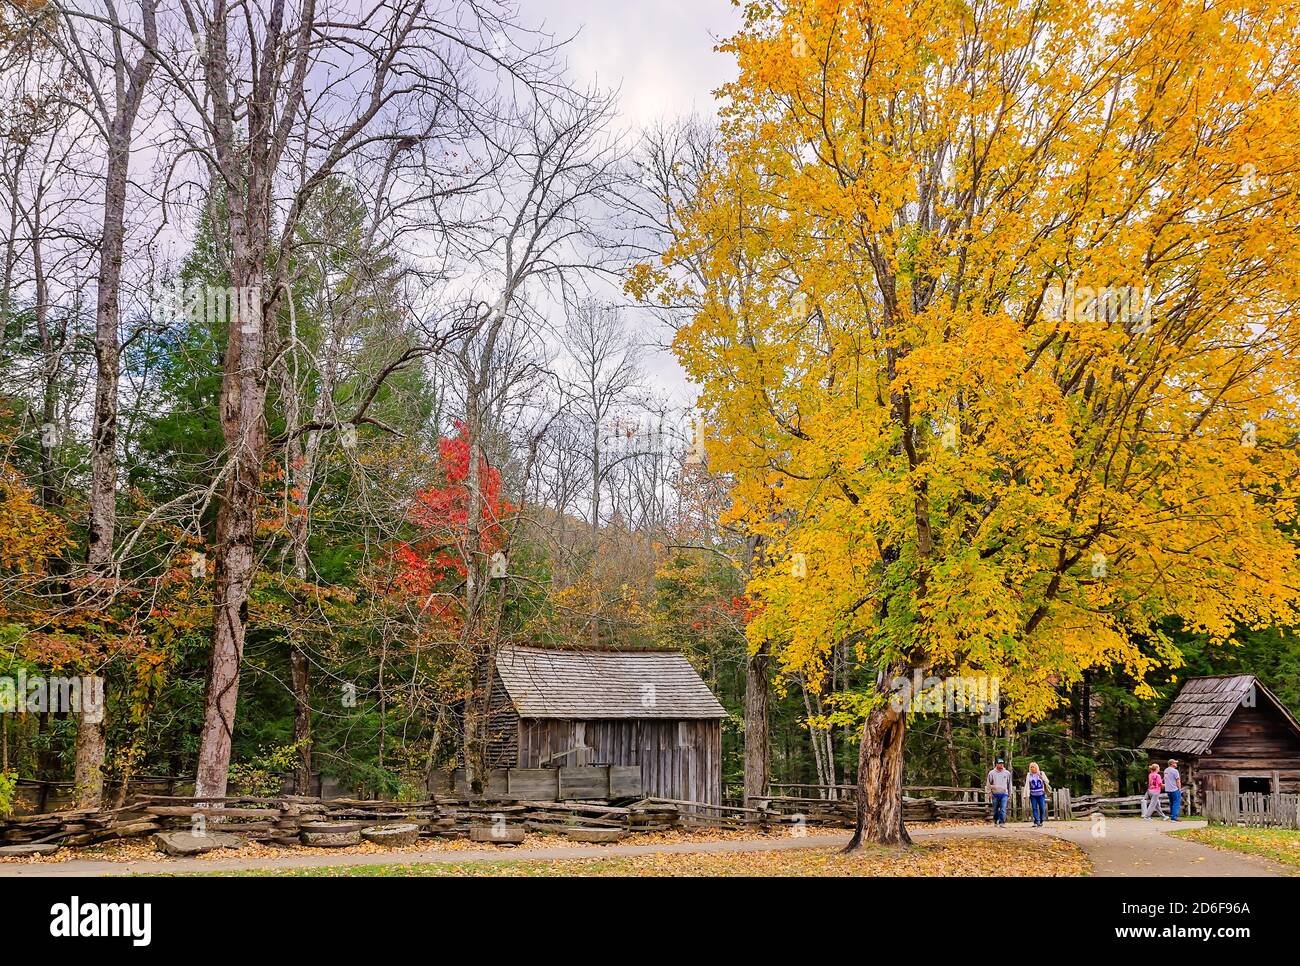 Touristen erkunden den John P. Cable Mill Complex im Great Smoky Mountains National Park, 2. November 2017, in Townsend, Tennessee. Stockfoto